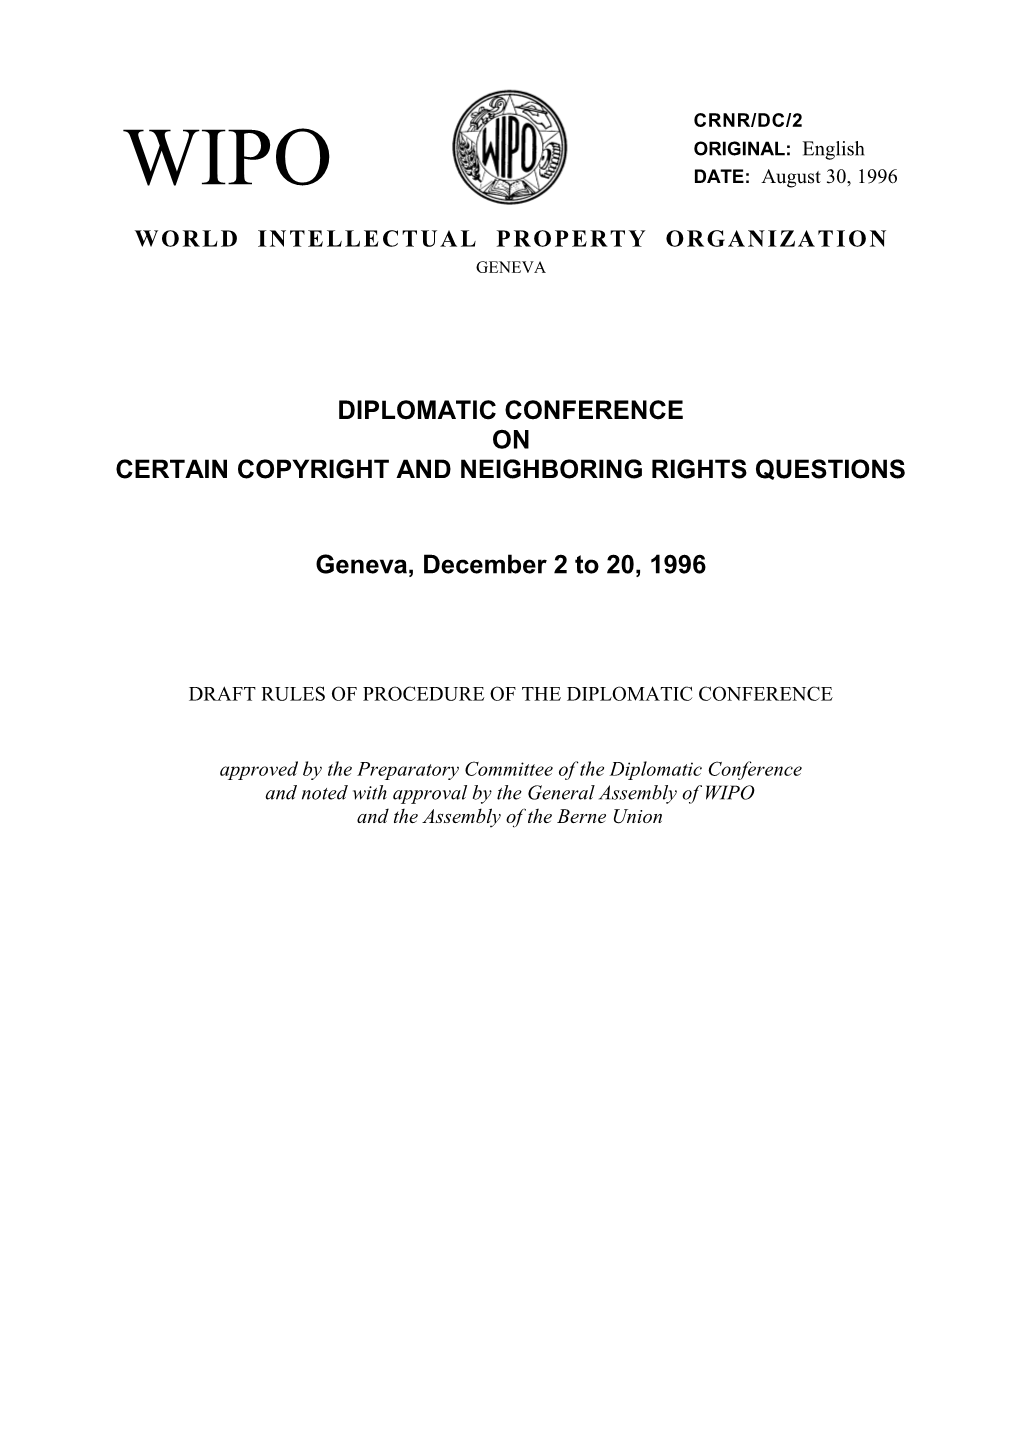 CRNR/DC/2: Draft Rules of the Diplomatic Conference